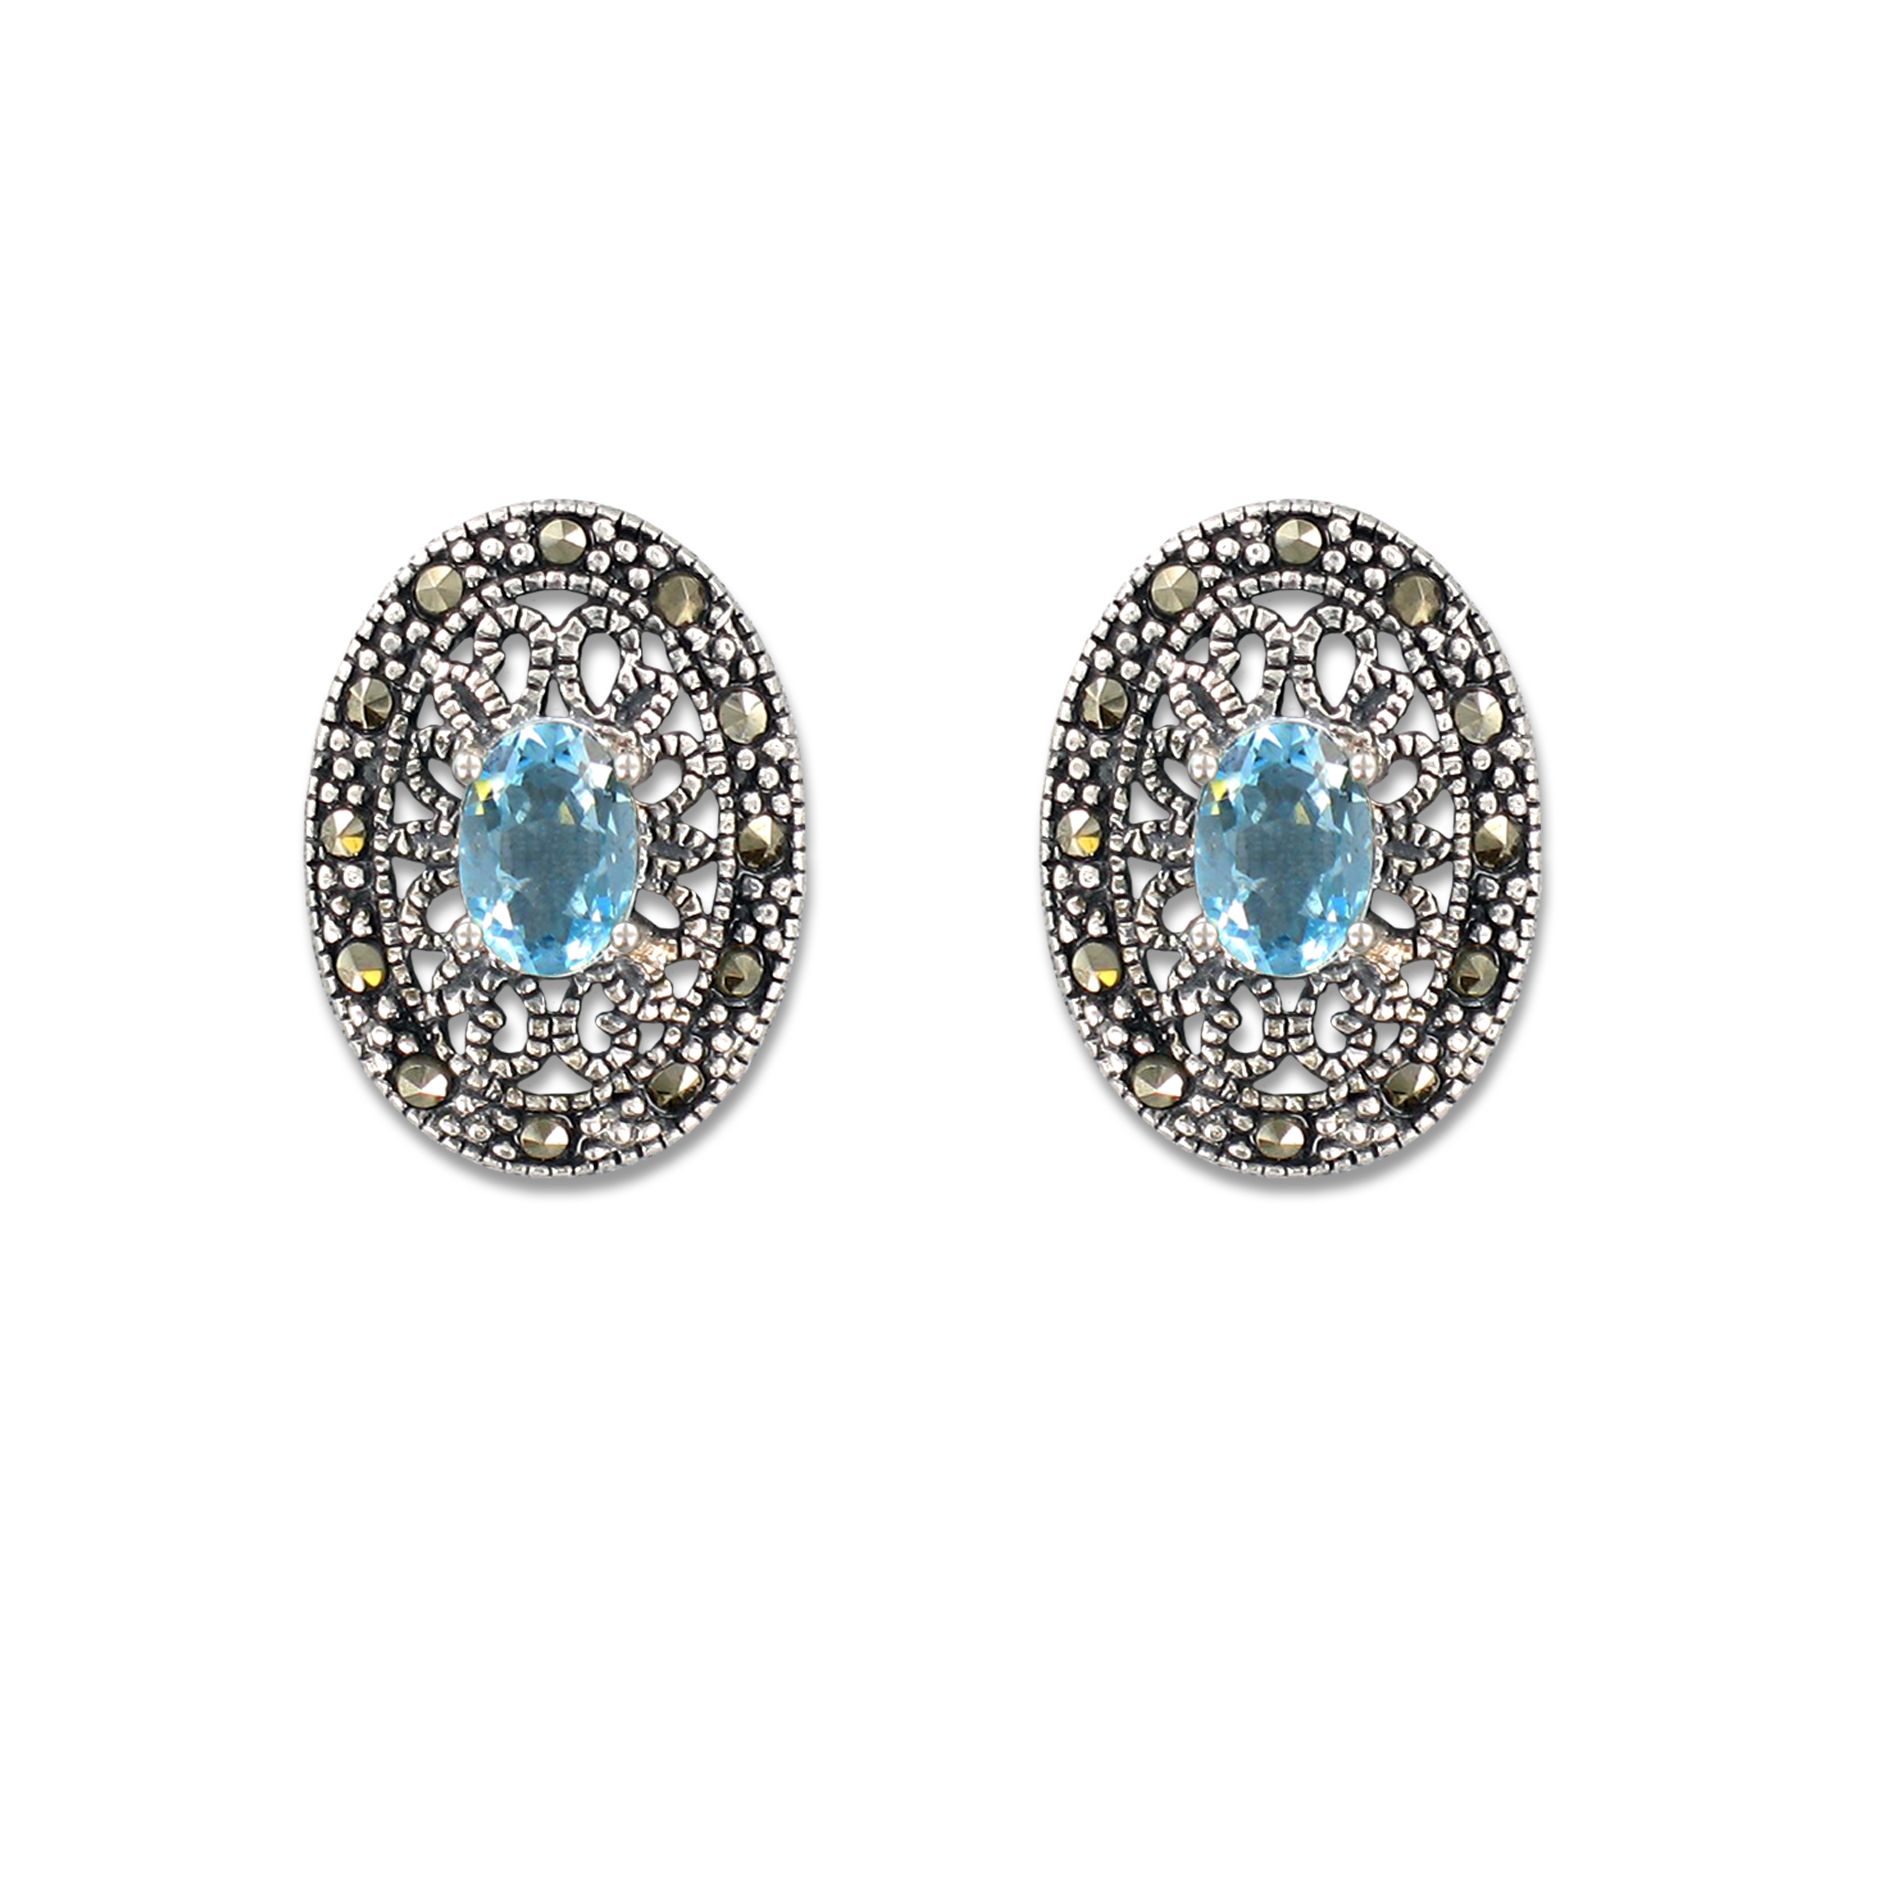 Sterling Silver Blue Topaz Earrings with Marcasite